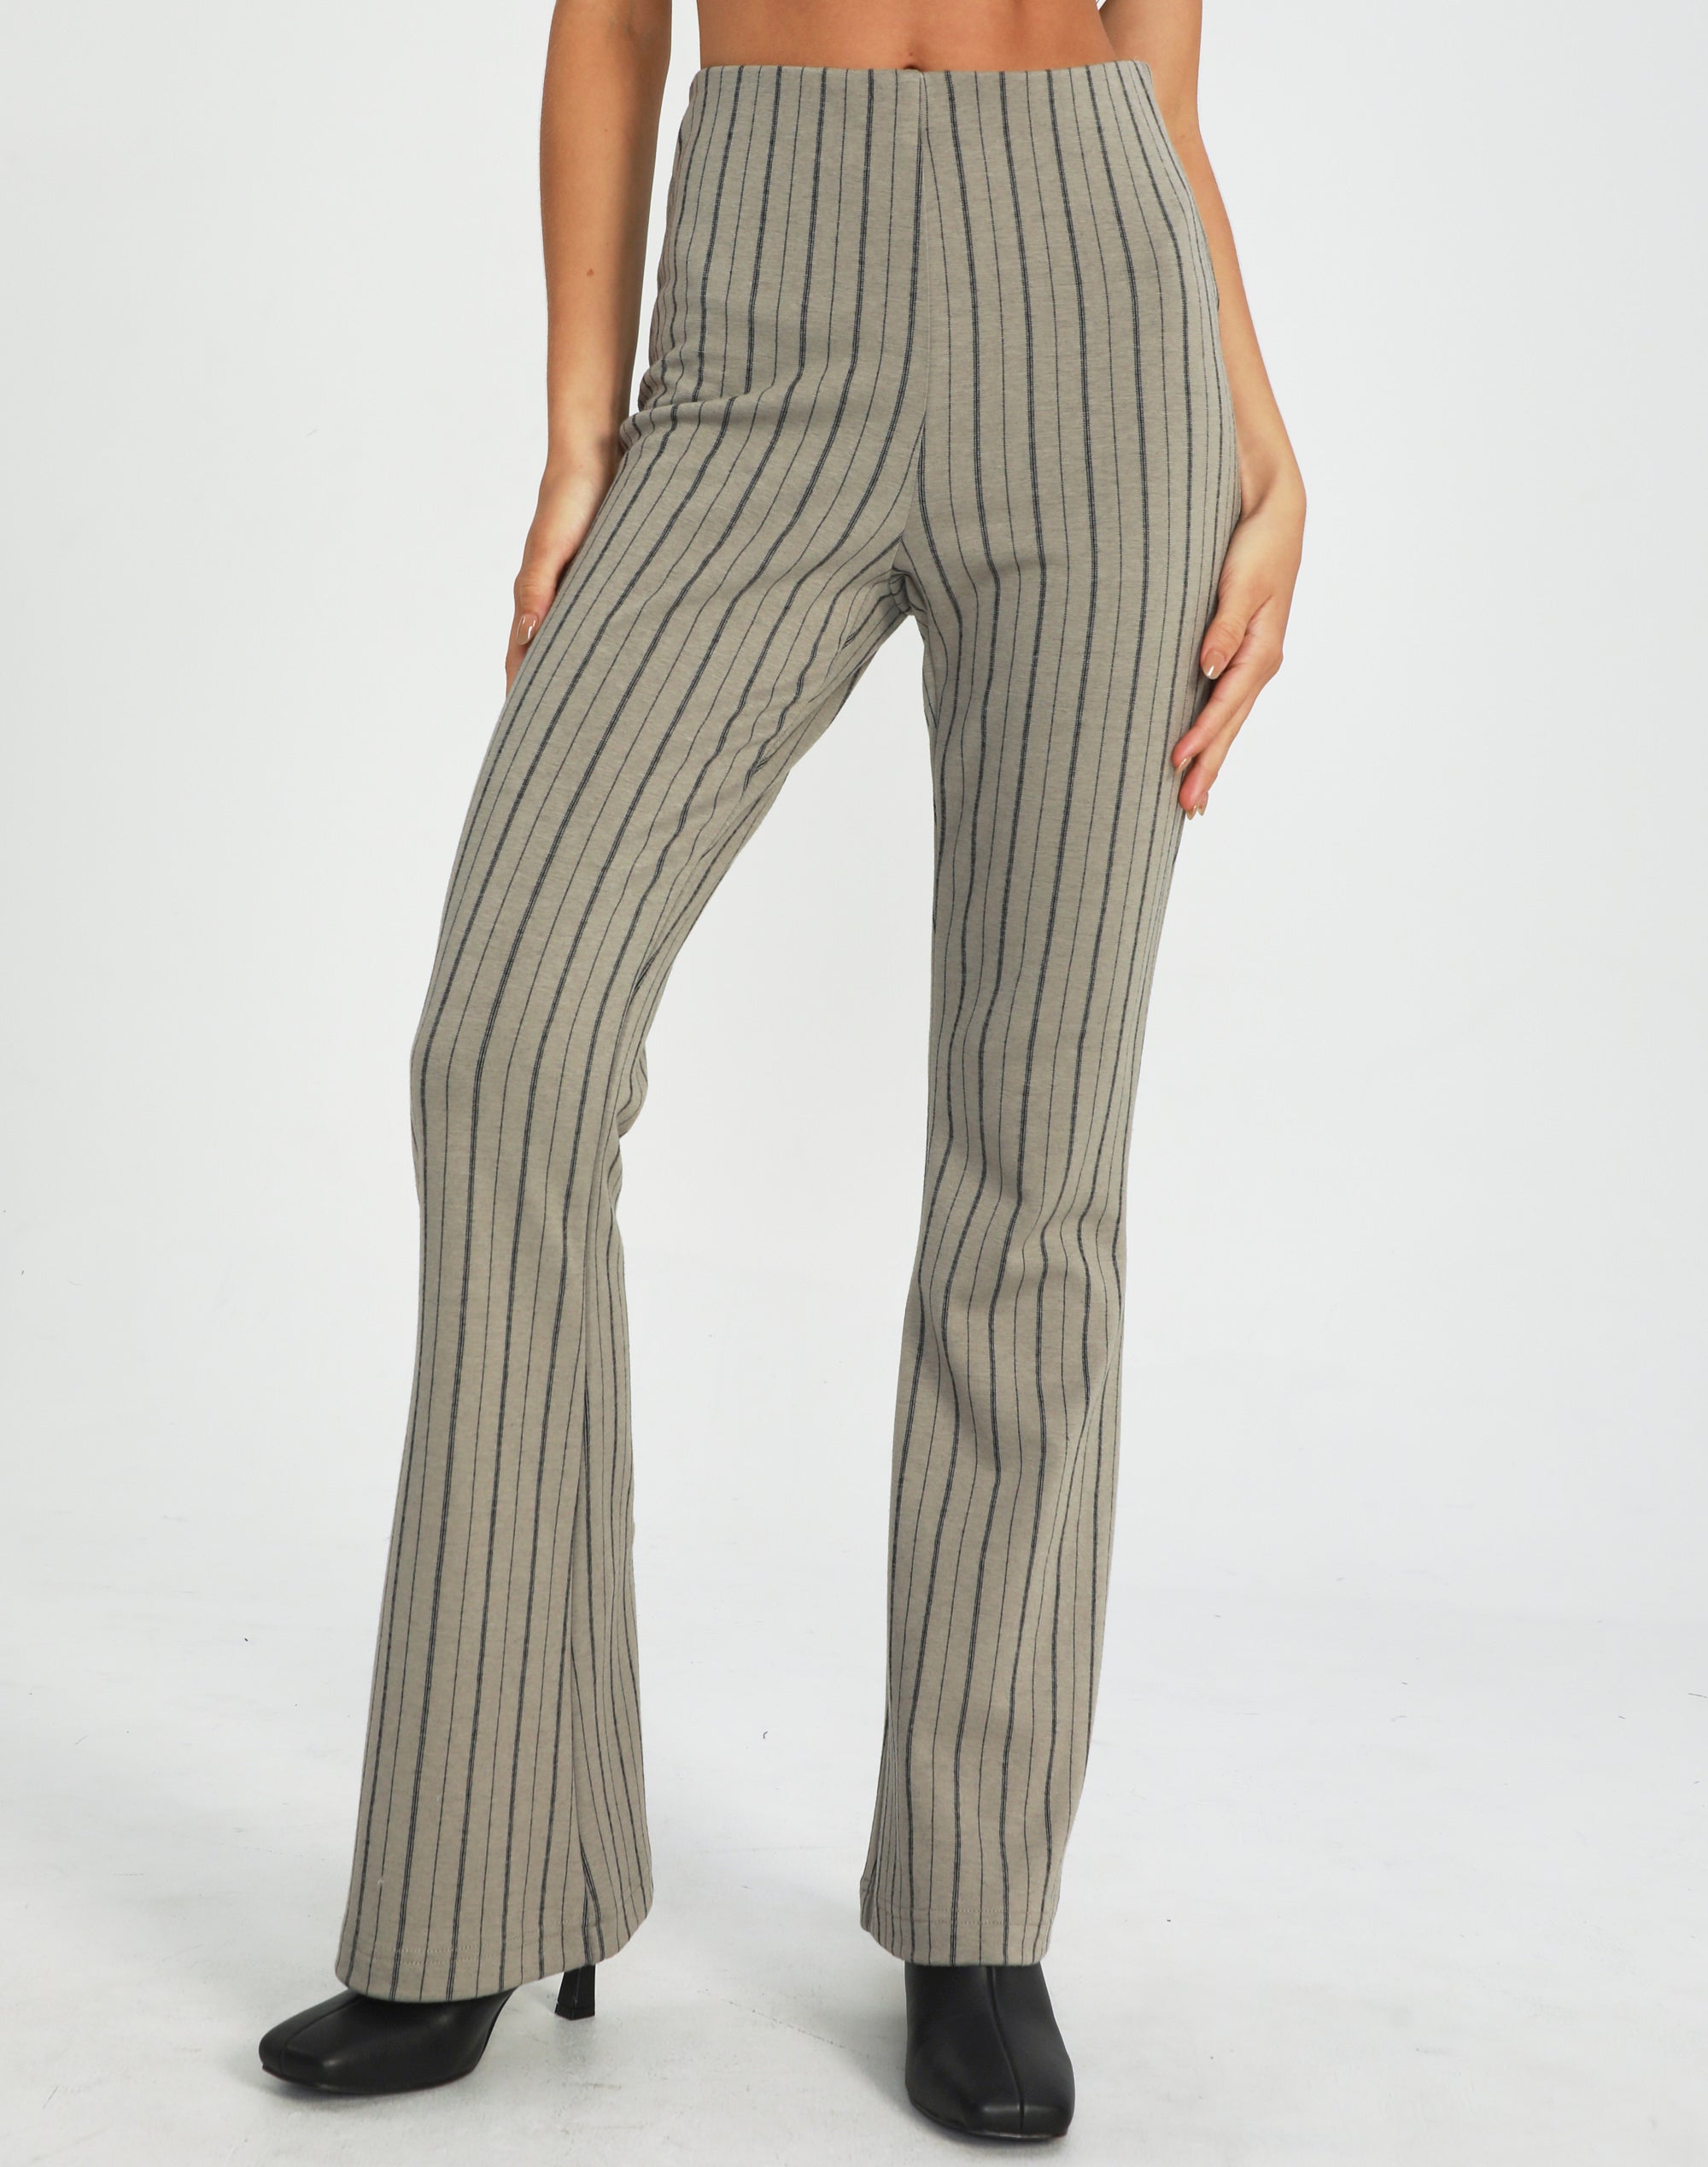 Pull On Ponte Pant at Seven7 Jeans